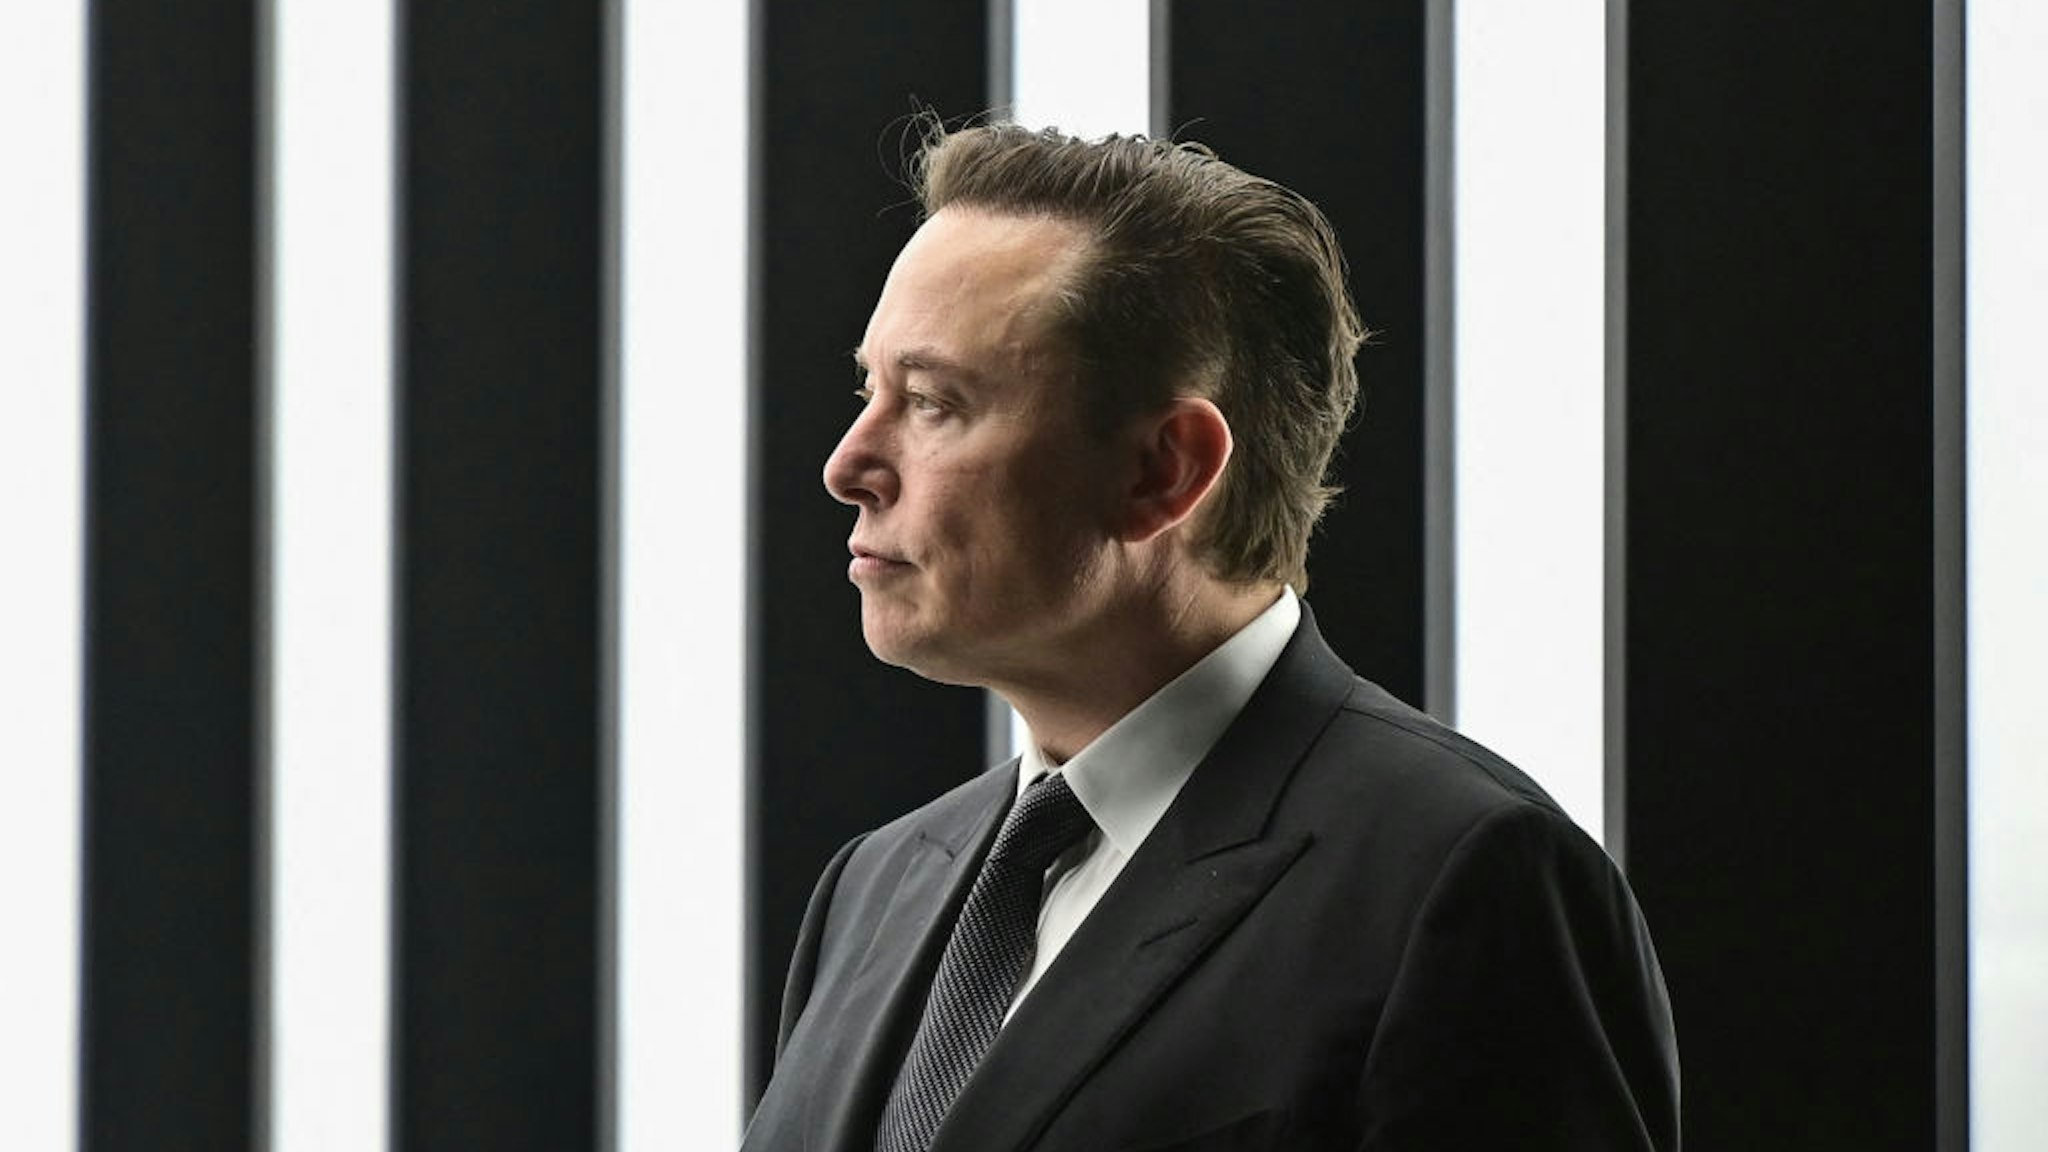 Tesla CEO Elon Musk is pictured as he attends the start of the production at Tesla's "Gigafactory" on March 22, 2022 in Gruenheide, southeast of Berlin. - US electric car pioneer Tesla received the go-ahead for its "gigafactory" in Germany on March 4, 2022, paving the way for production to begin shortly after an approval process dogged by delays and setbacks. (Photo by Patrick Pleul / POOL / AFP)